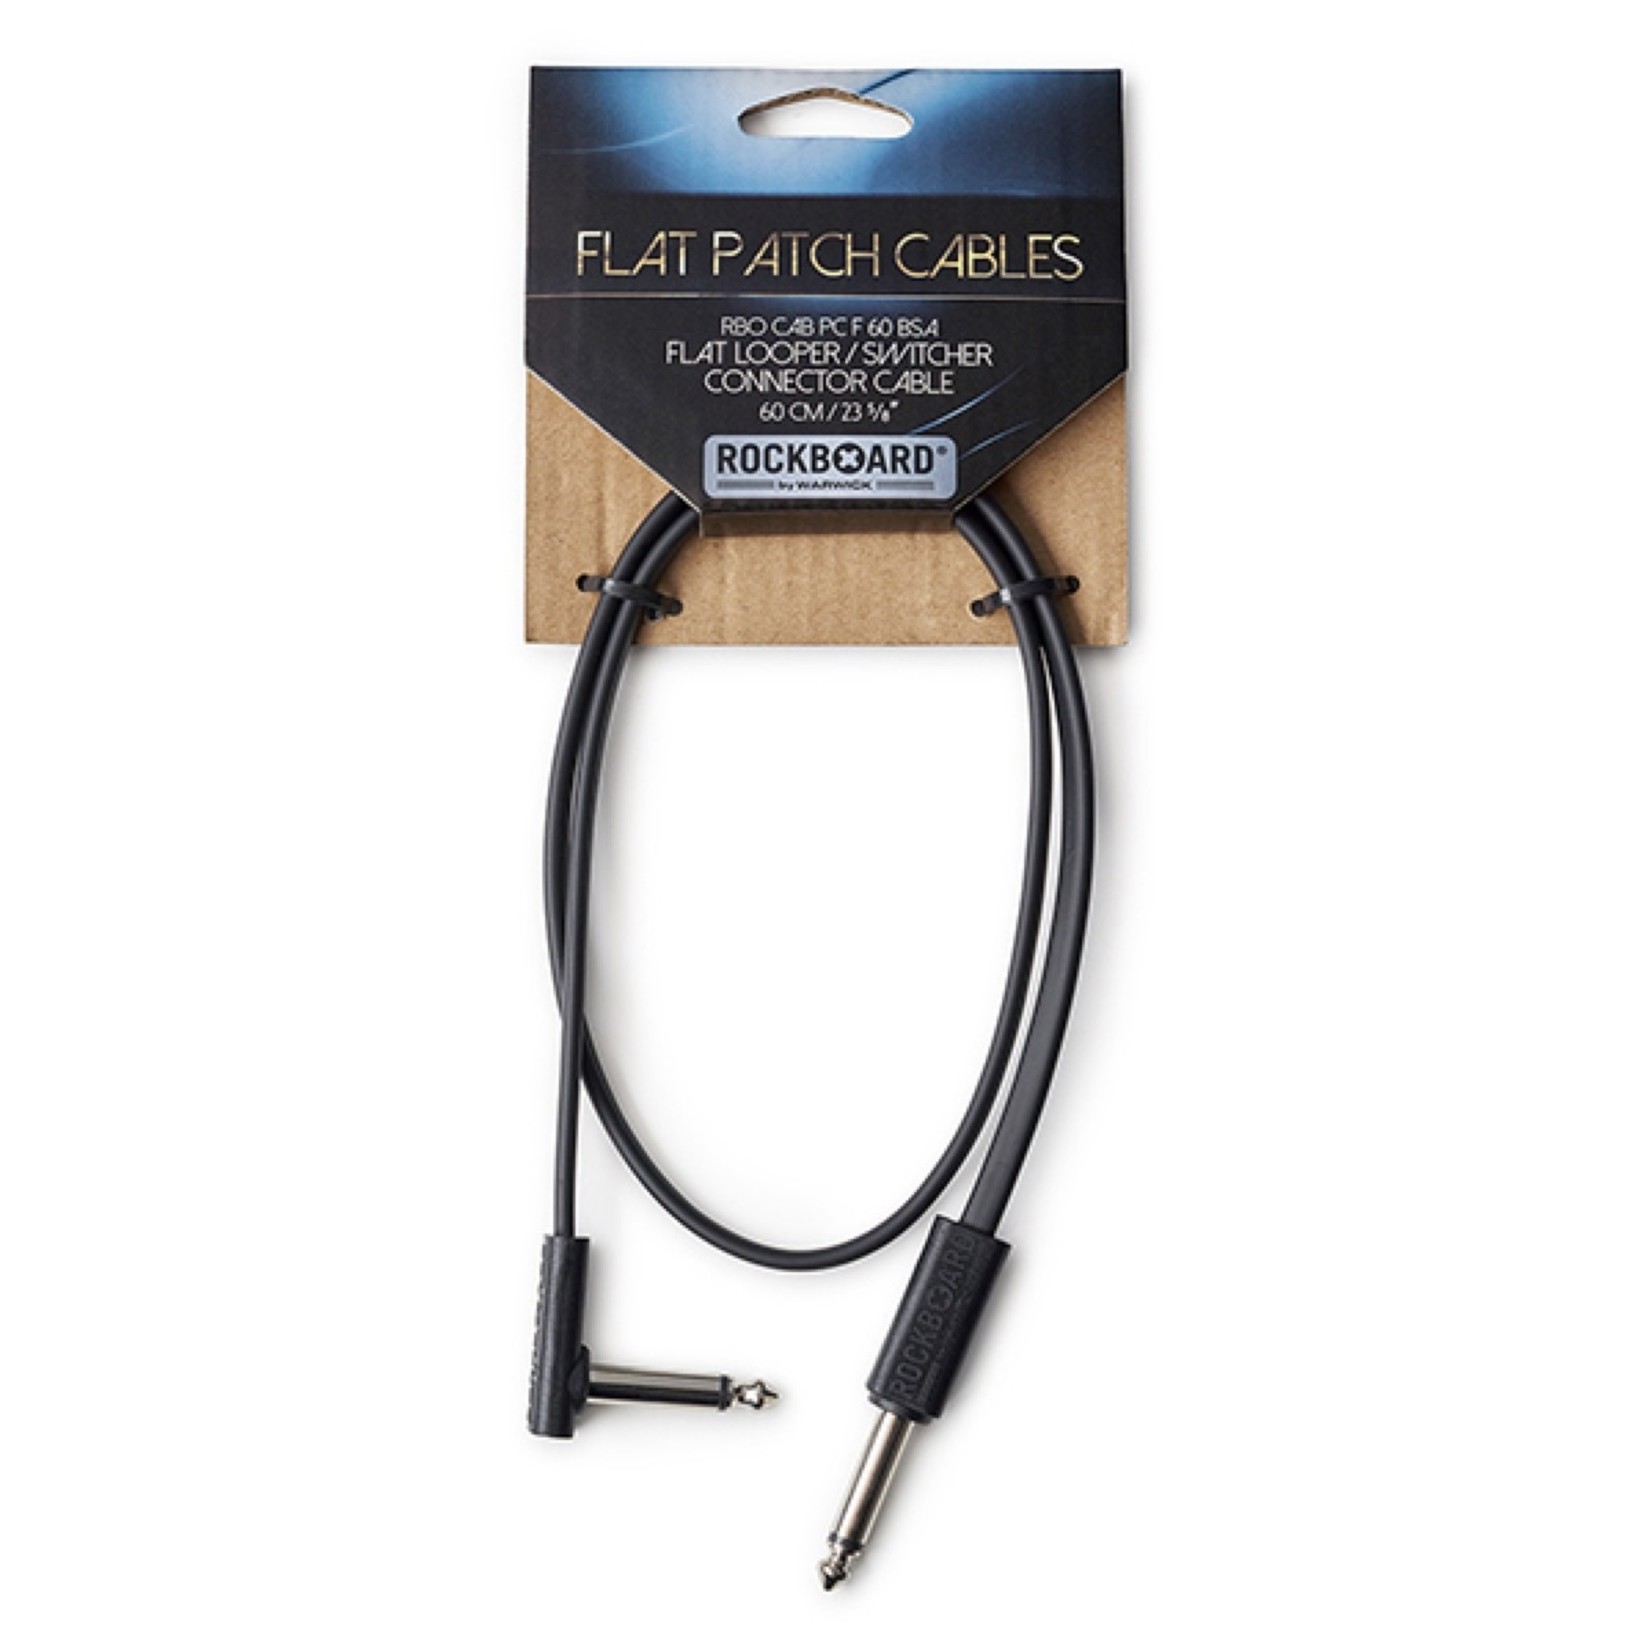 Rockboard RockBoard Flat Looper / Switcher Connector Cable, 60 cm / 23 5/8", Right Angle to Straight 1/4" TS